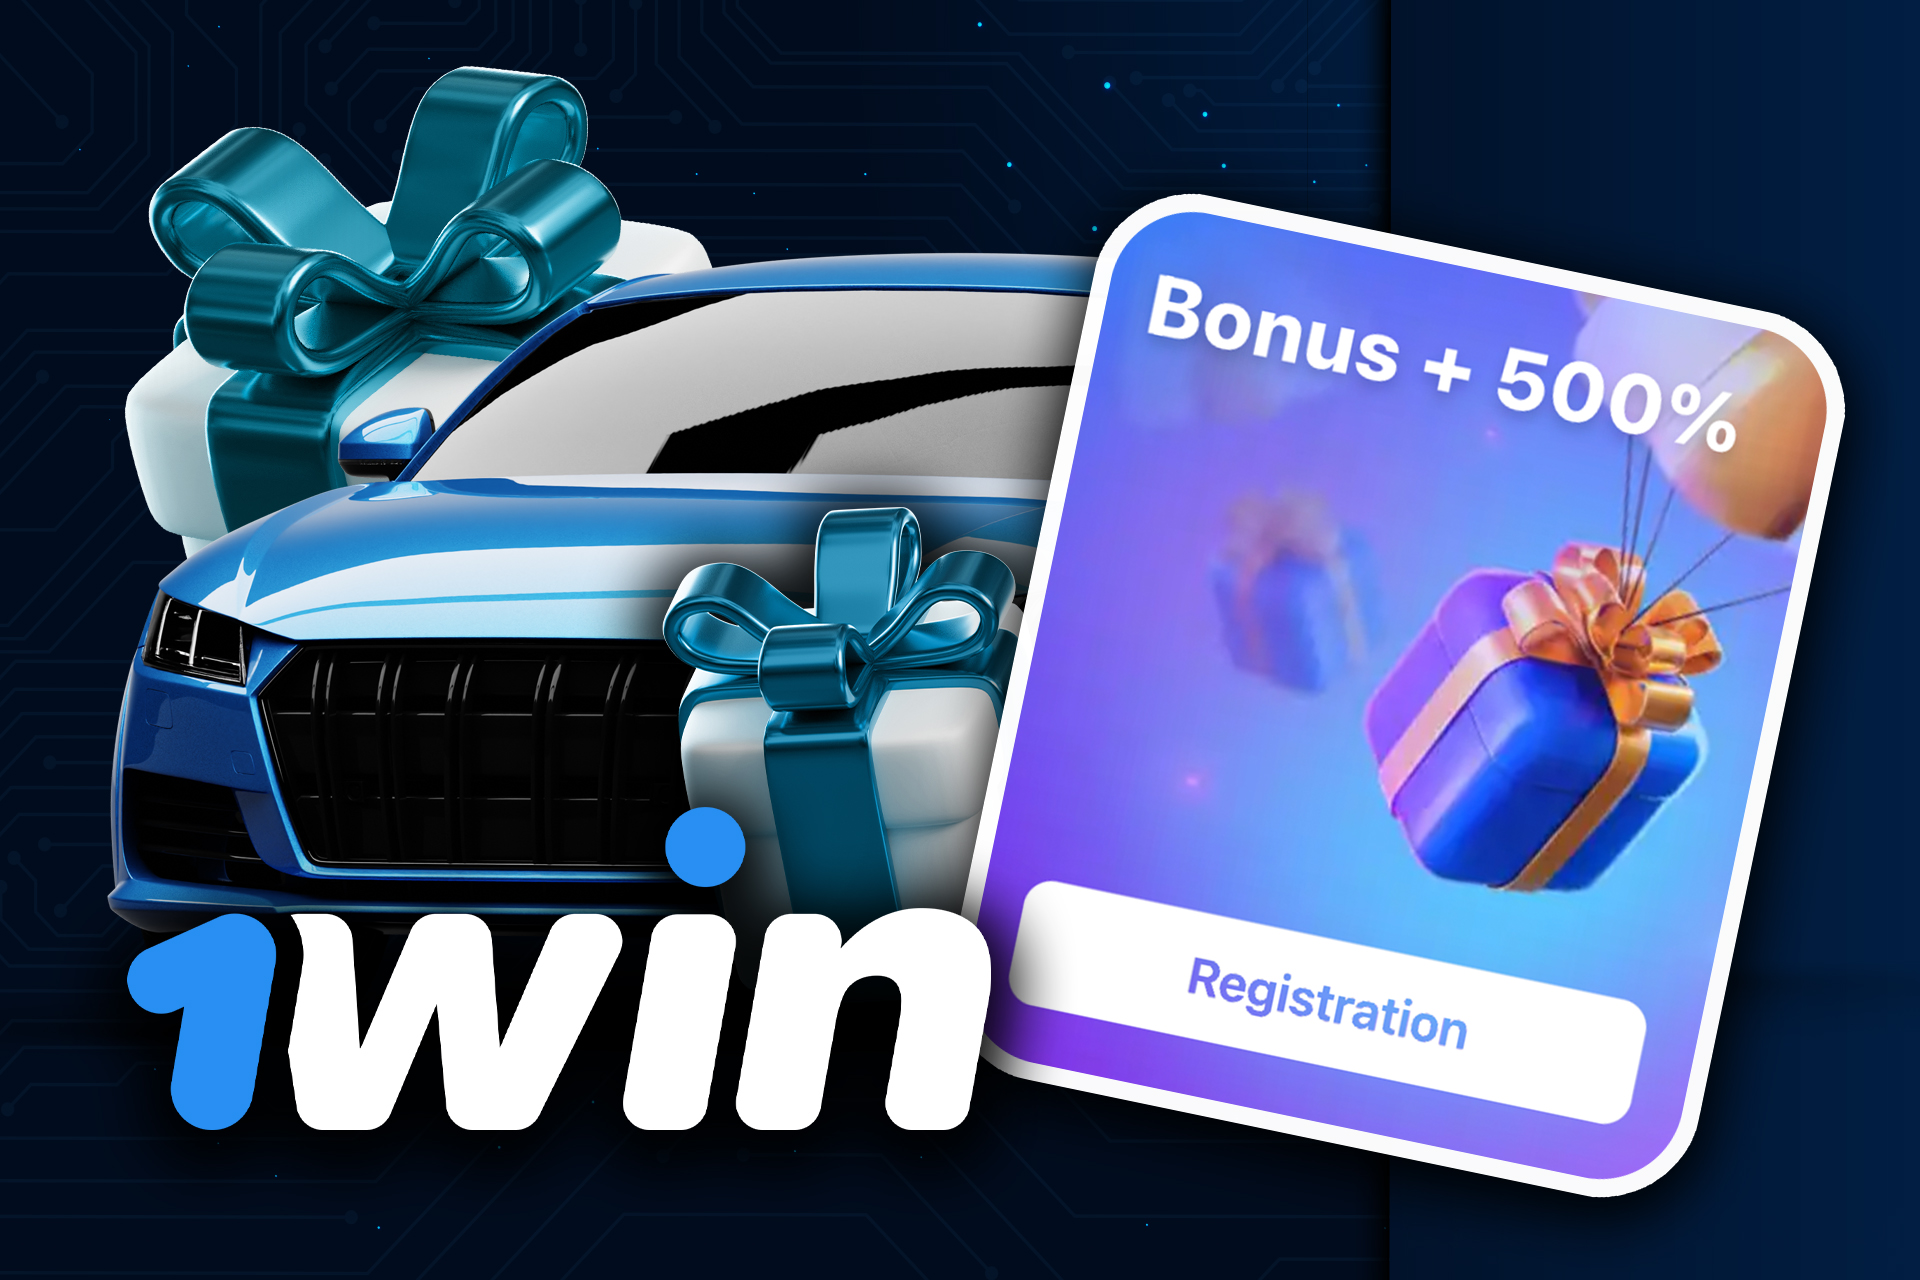 Get up to 500% on your first deposits on 1win.